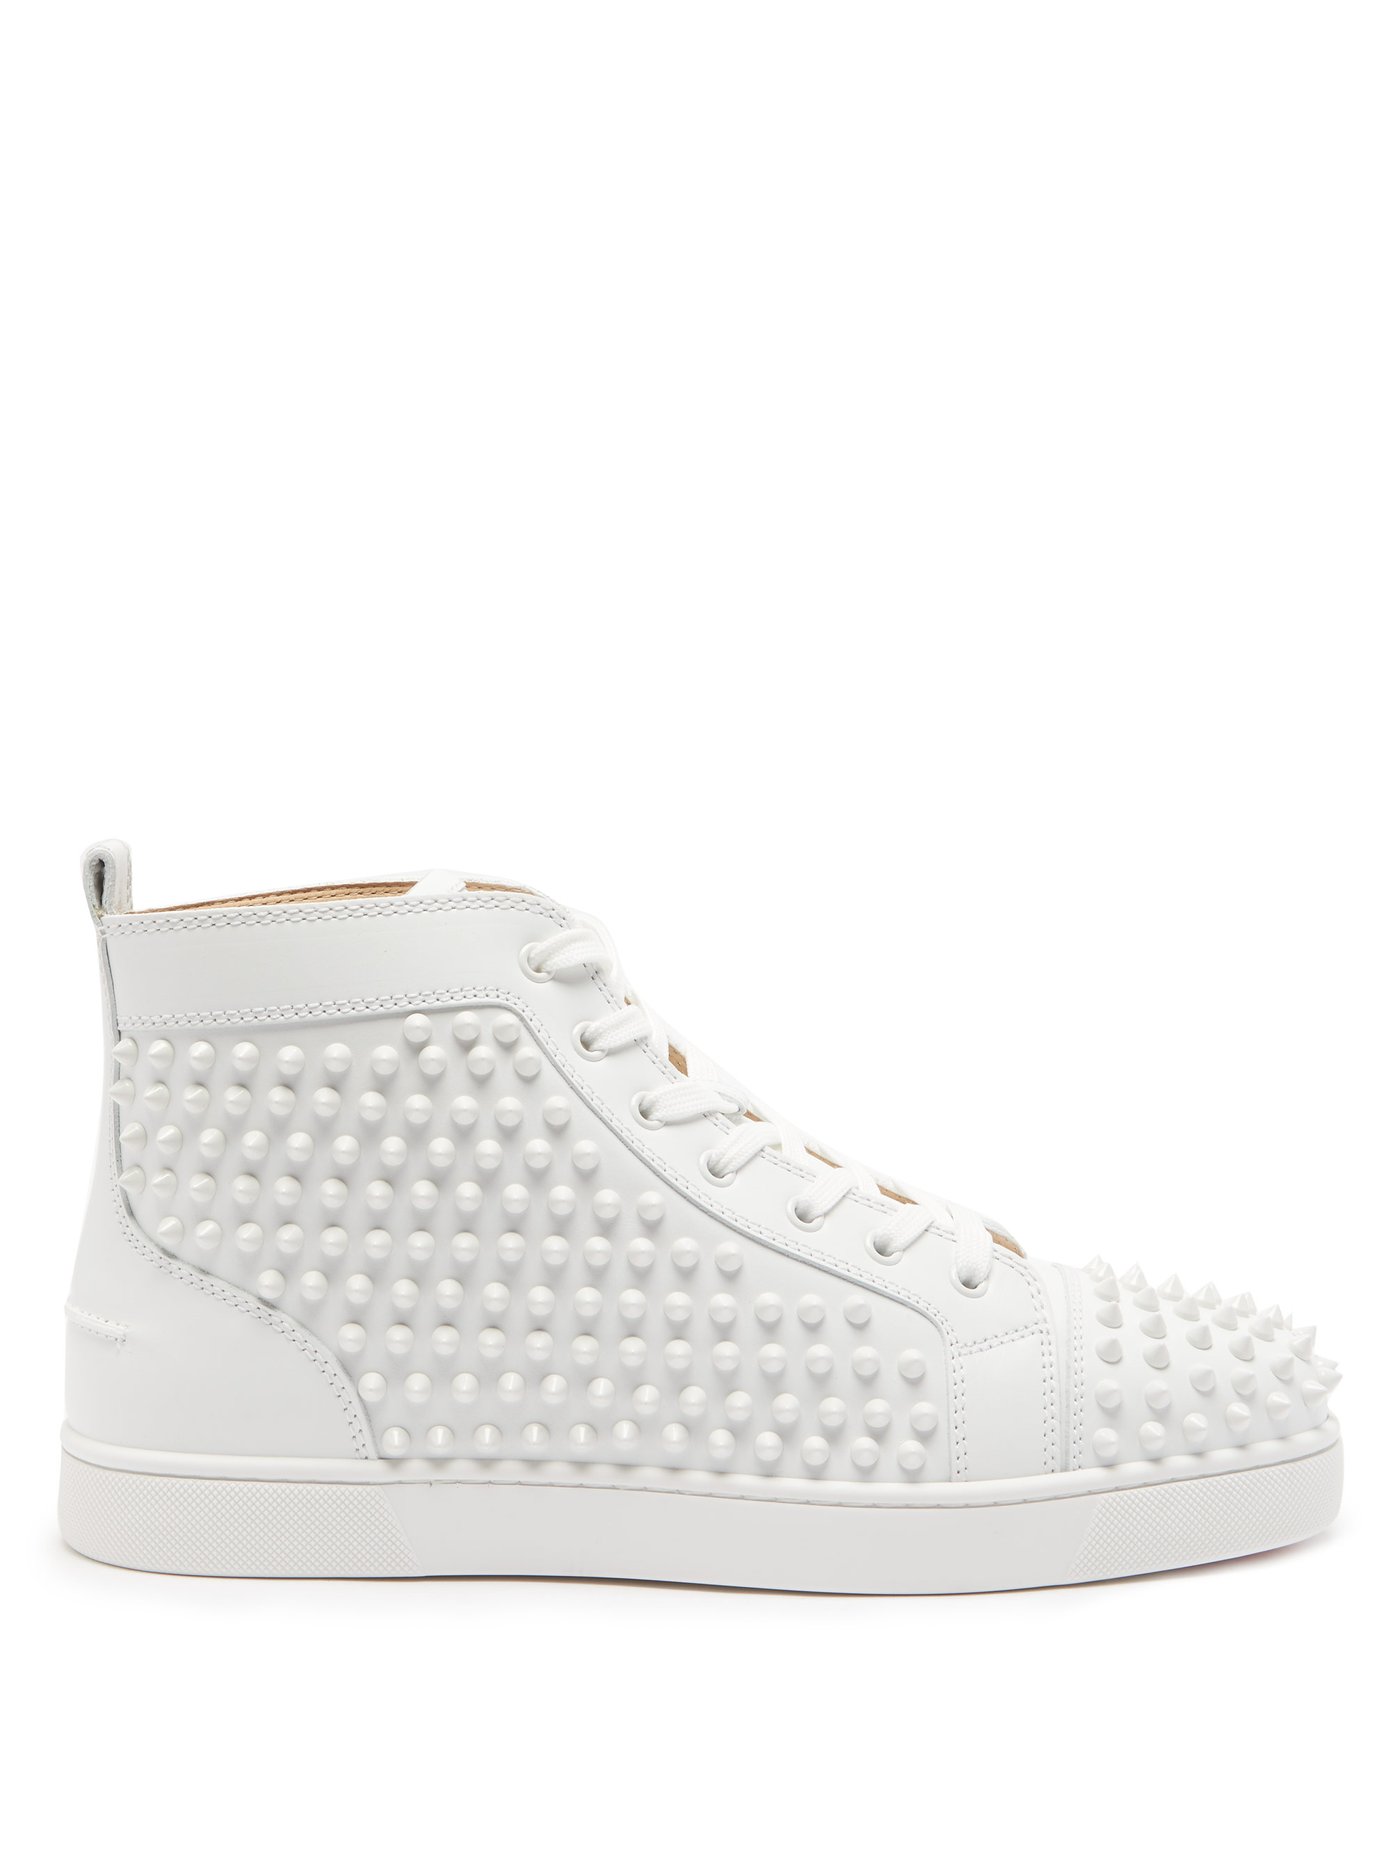 white low top louboutins spikes